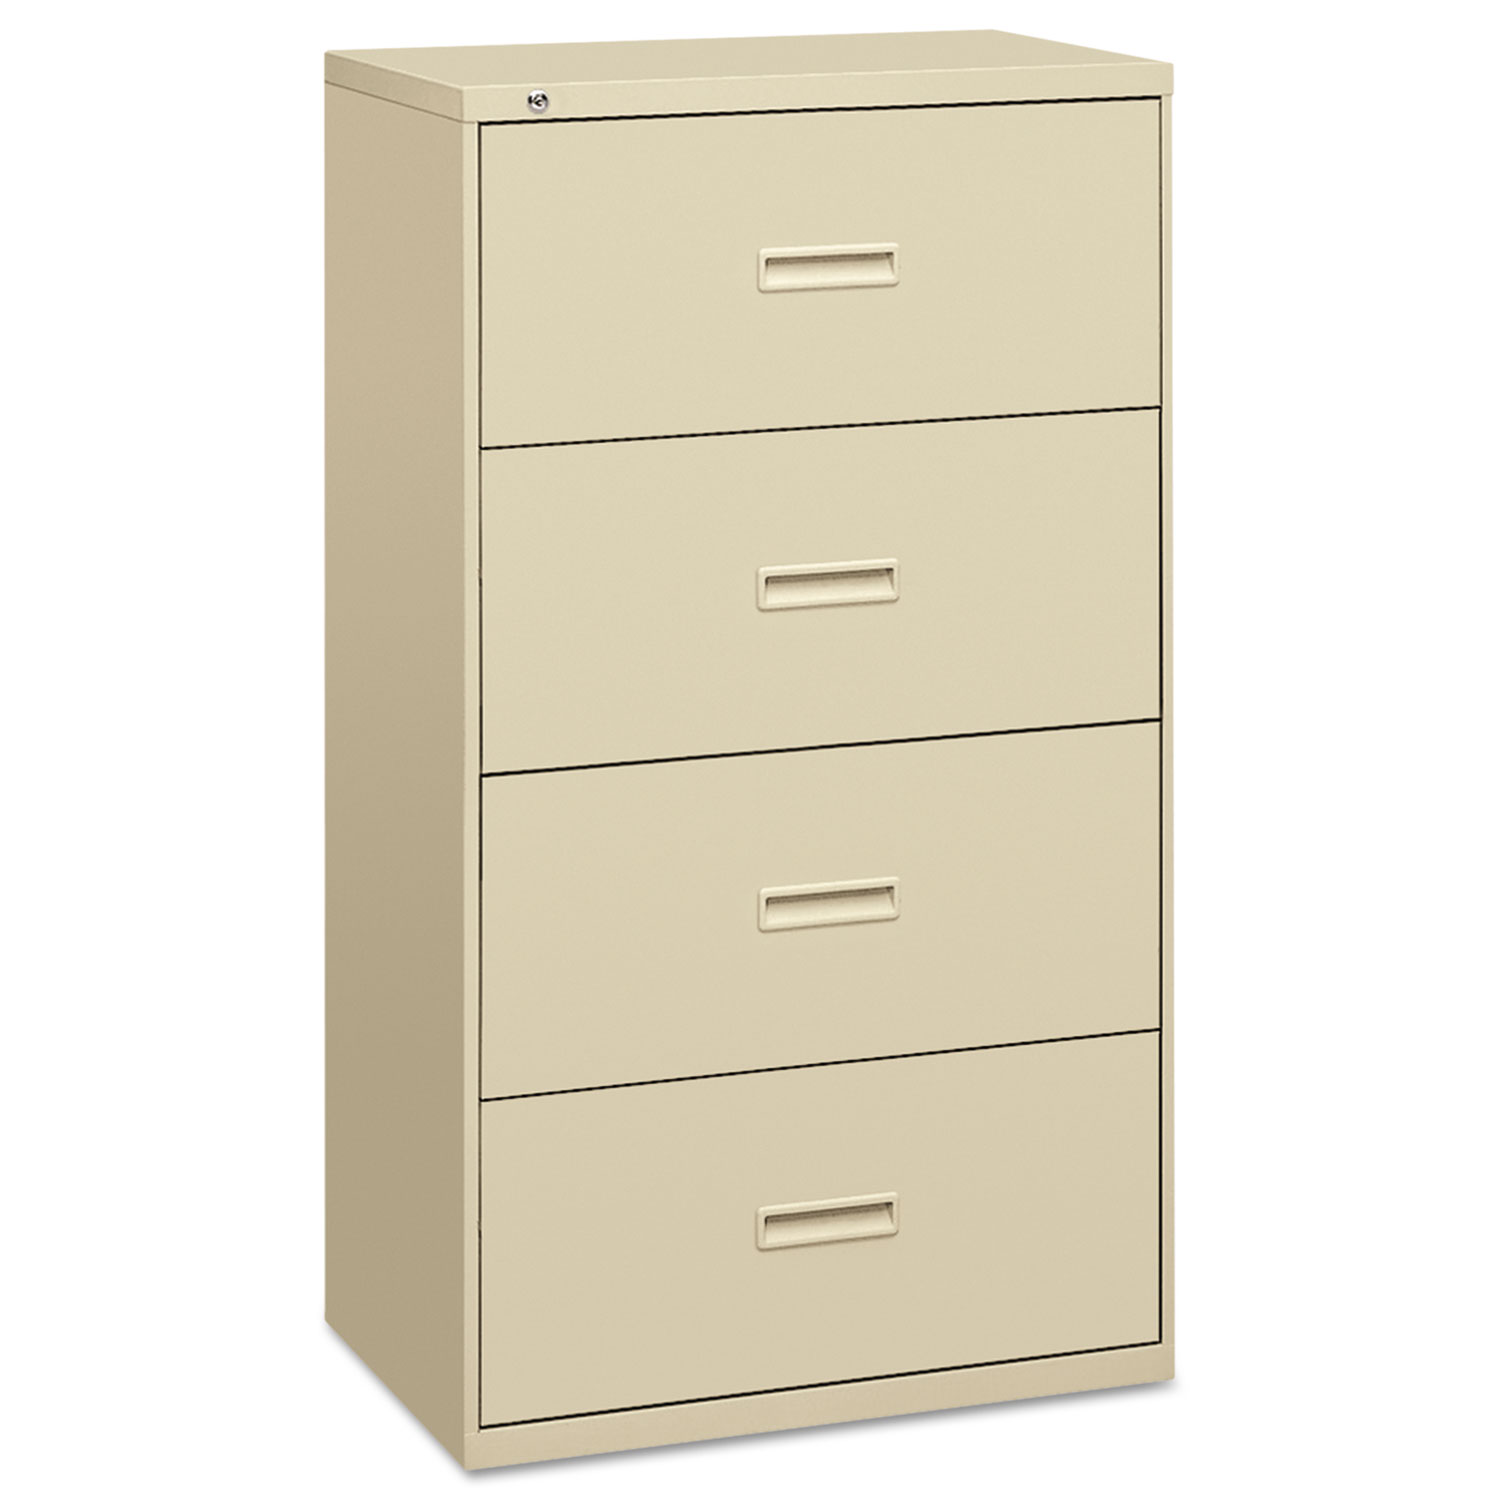 Basyx 400 Series Four-Drawer Lateral File, 36w x 19-1/4d x 53-1/4h, Putty